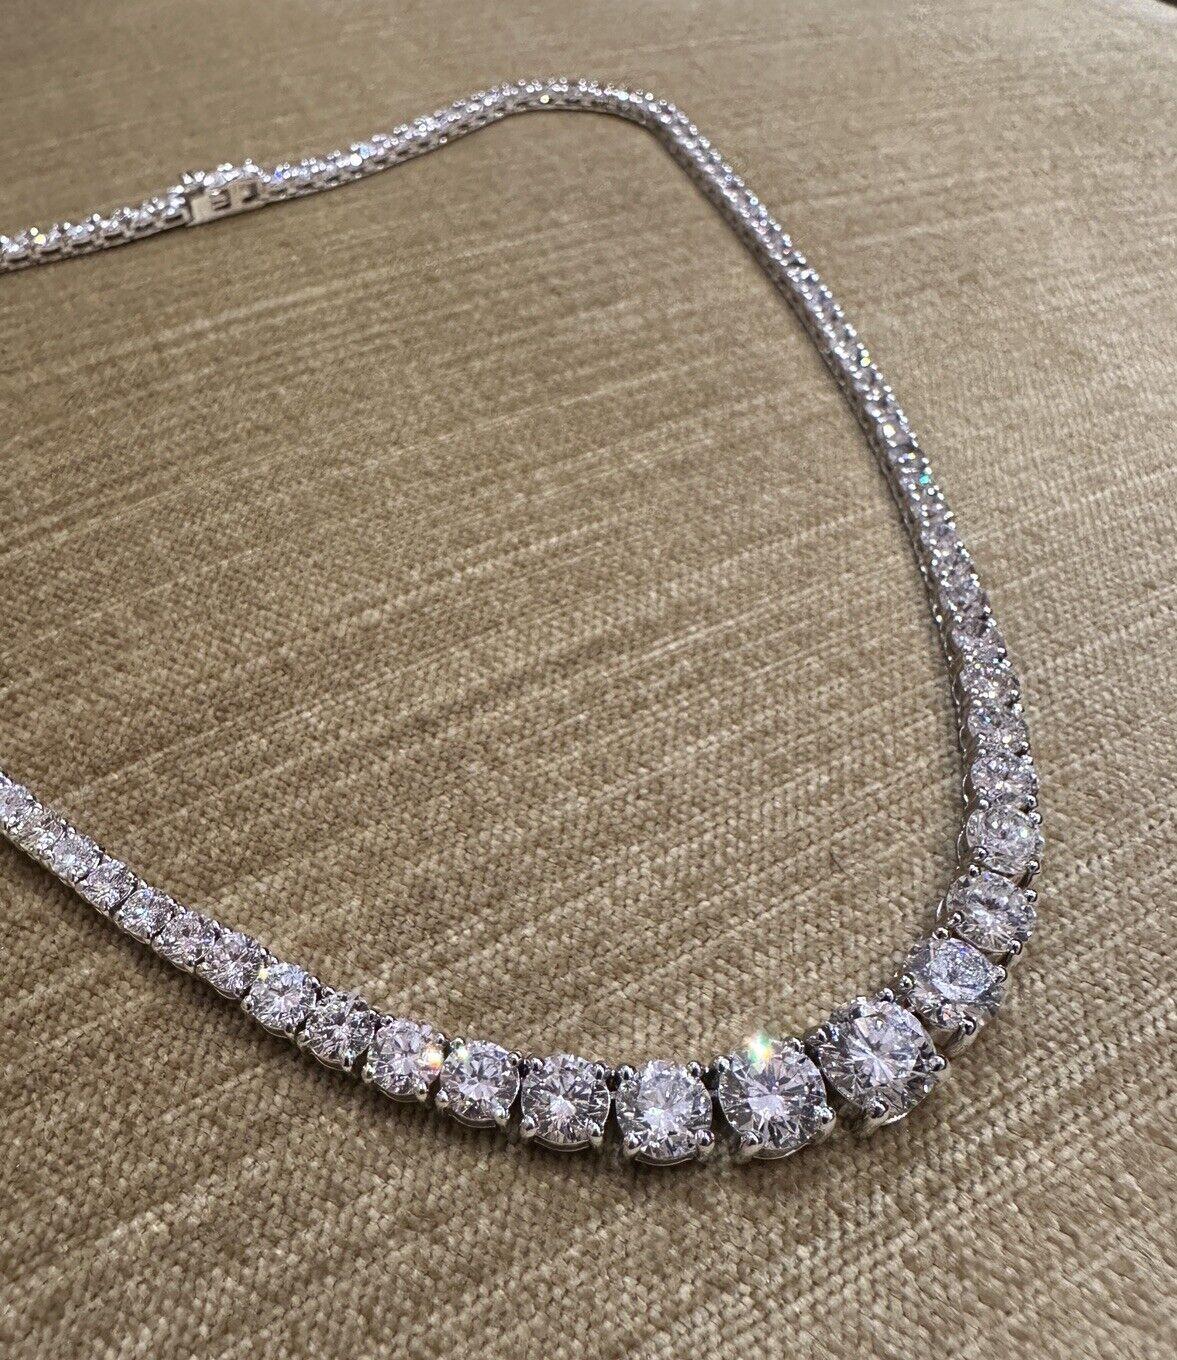 Diamond Riviera Necklace 24.12 Carat Total in 4-prong 18k White Gold setting For Sale 1